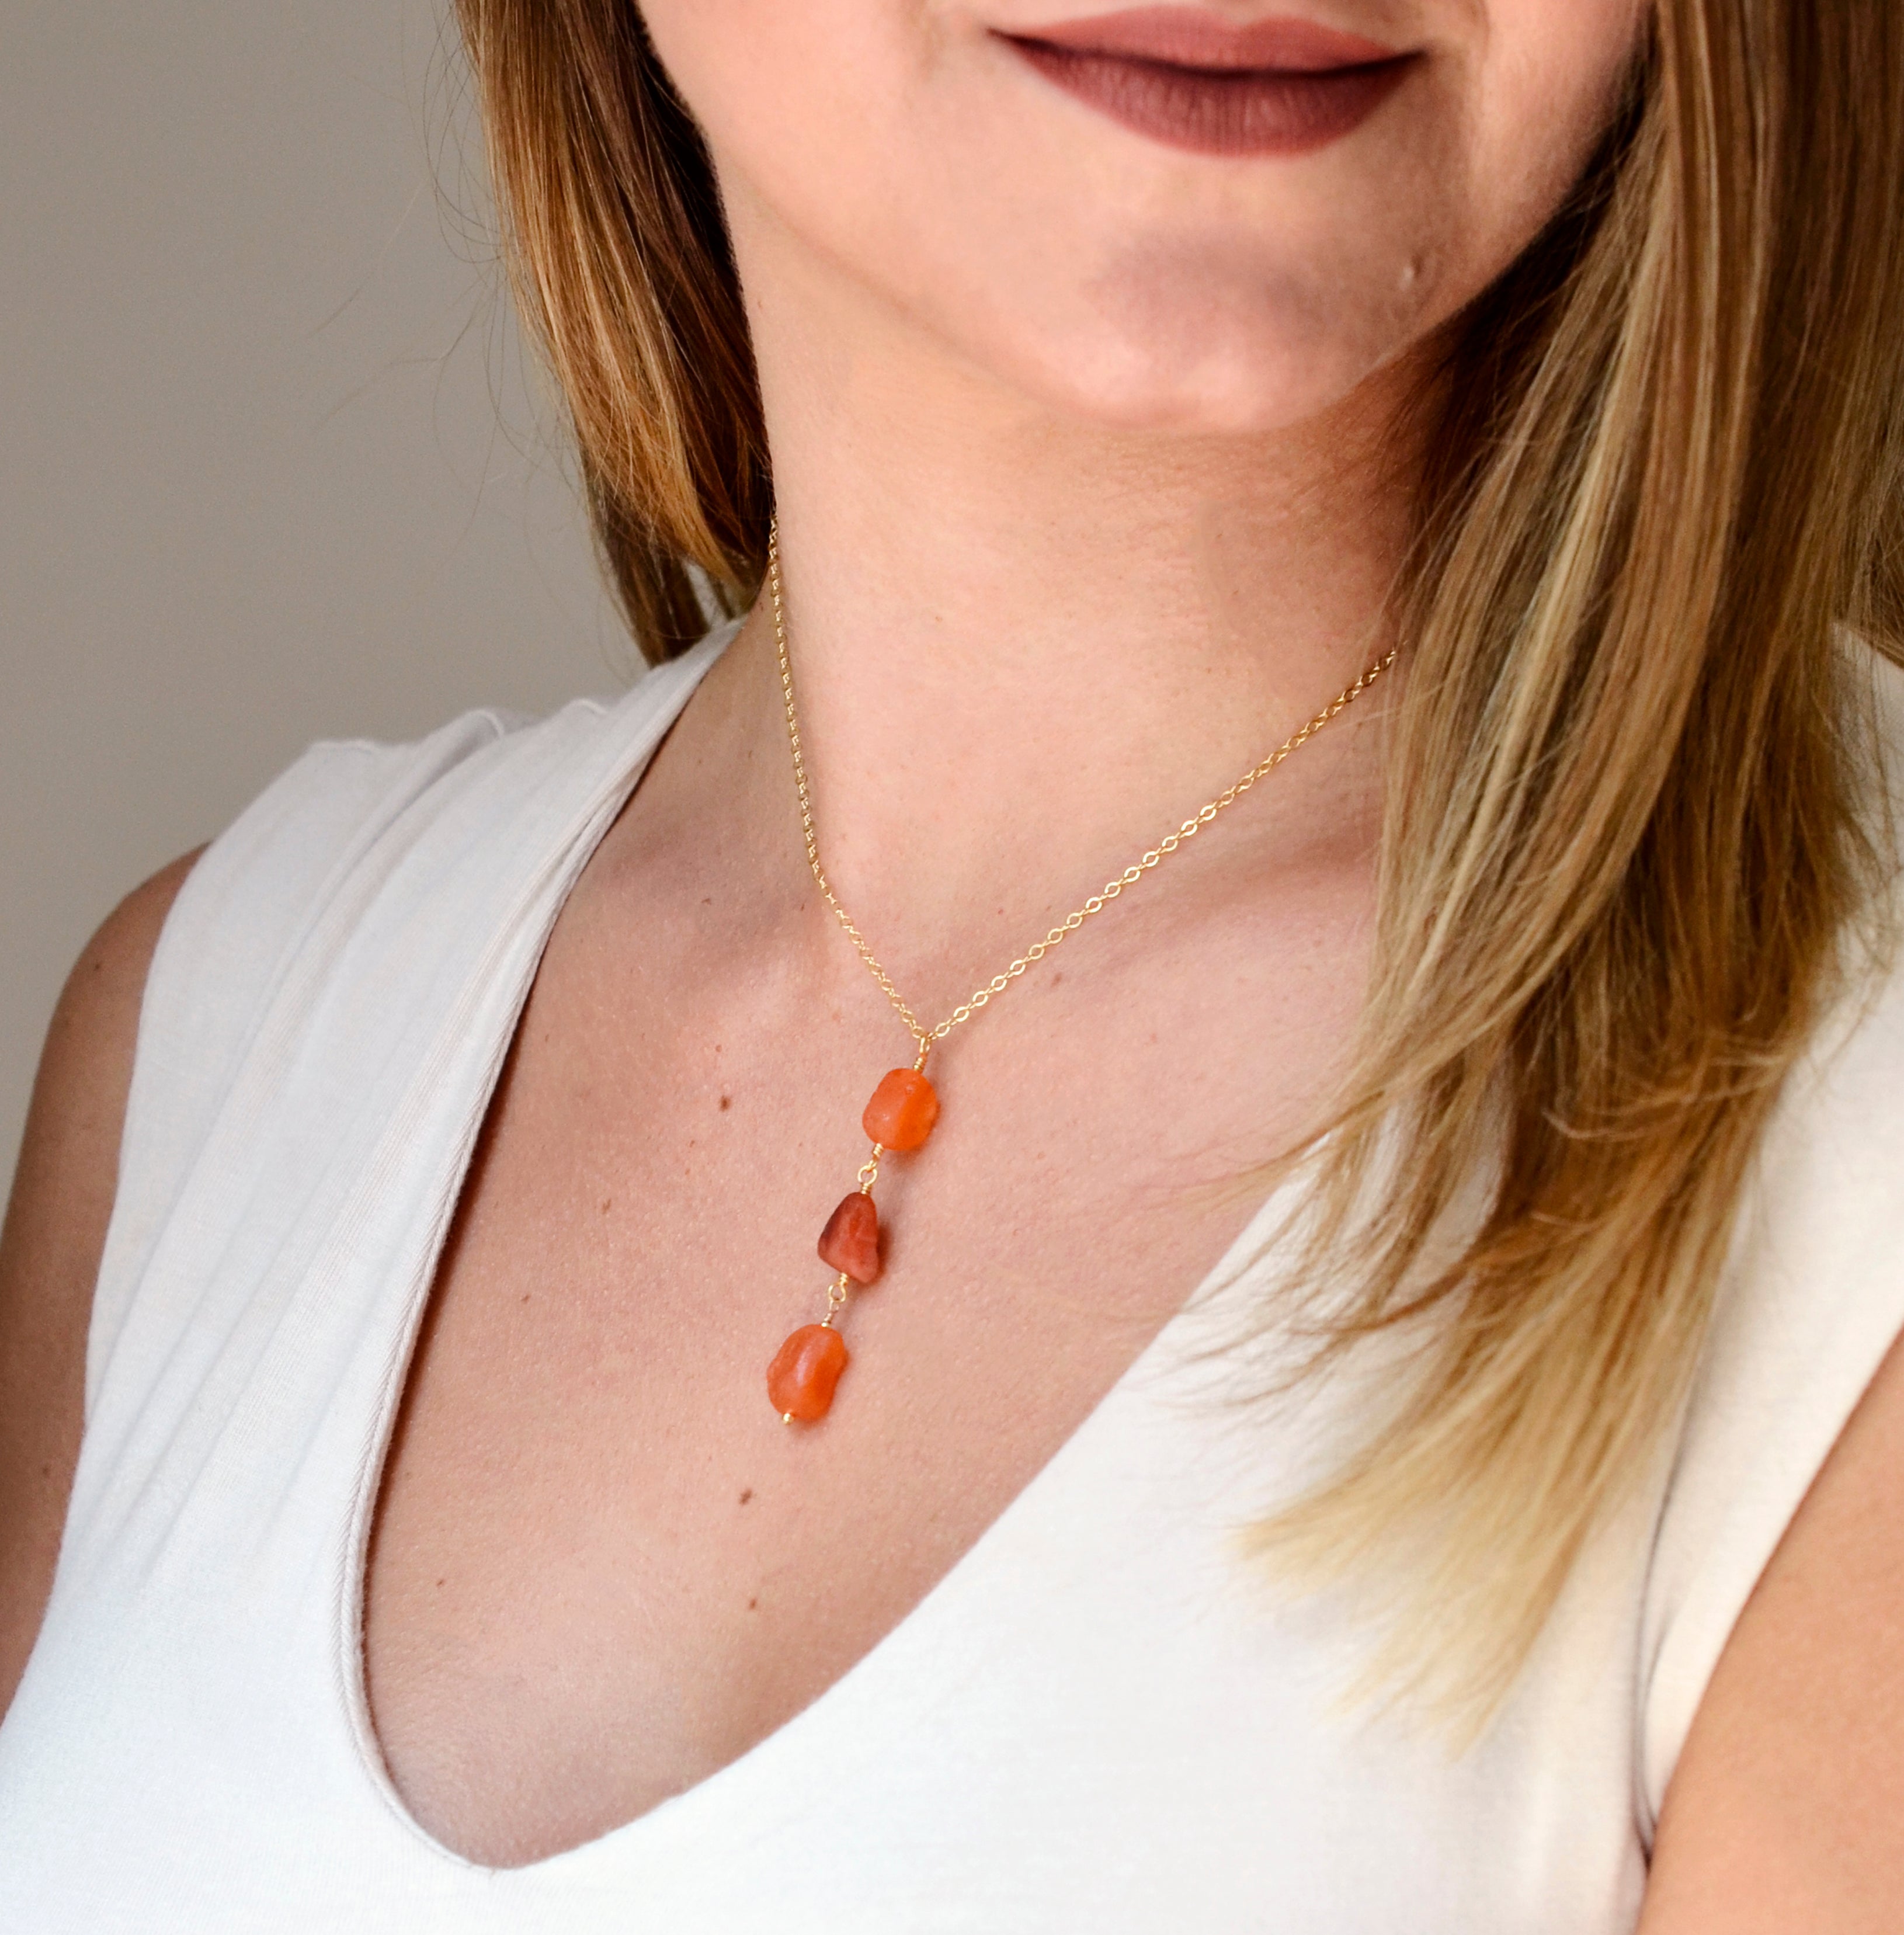 Carnelian Gemstone Pendant In White Metal With Lab Certificate (Red |  Orange) (7-7.5 Ct Approx) (1 Pc) – Numeroastro